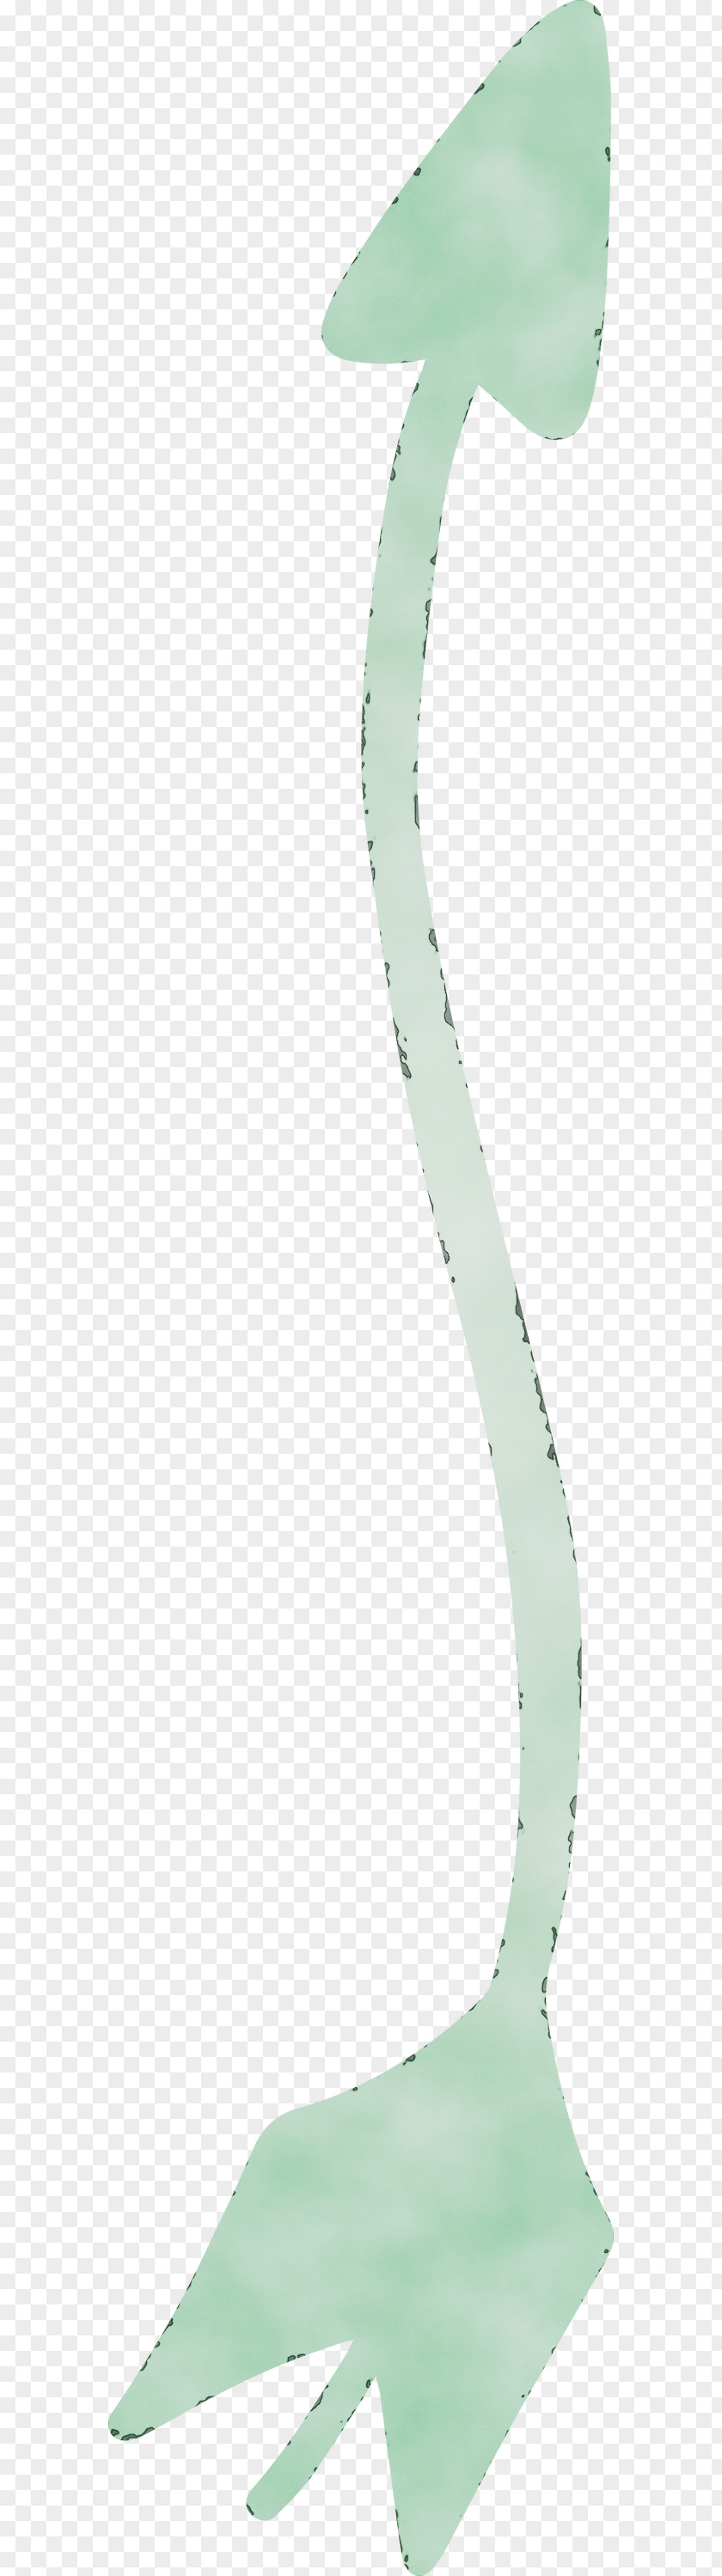 Machete Knife Cold Weapon Sabre Blade PNG